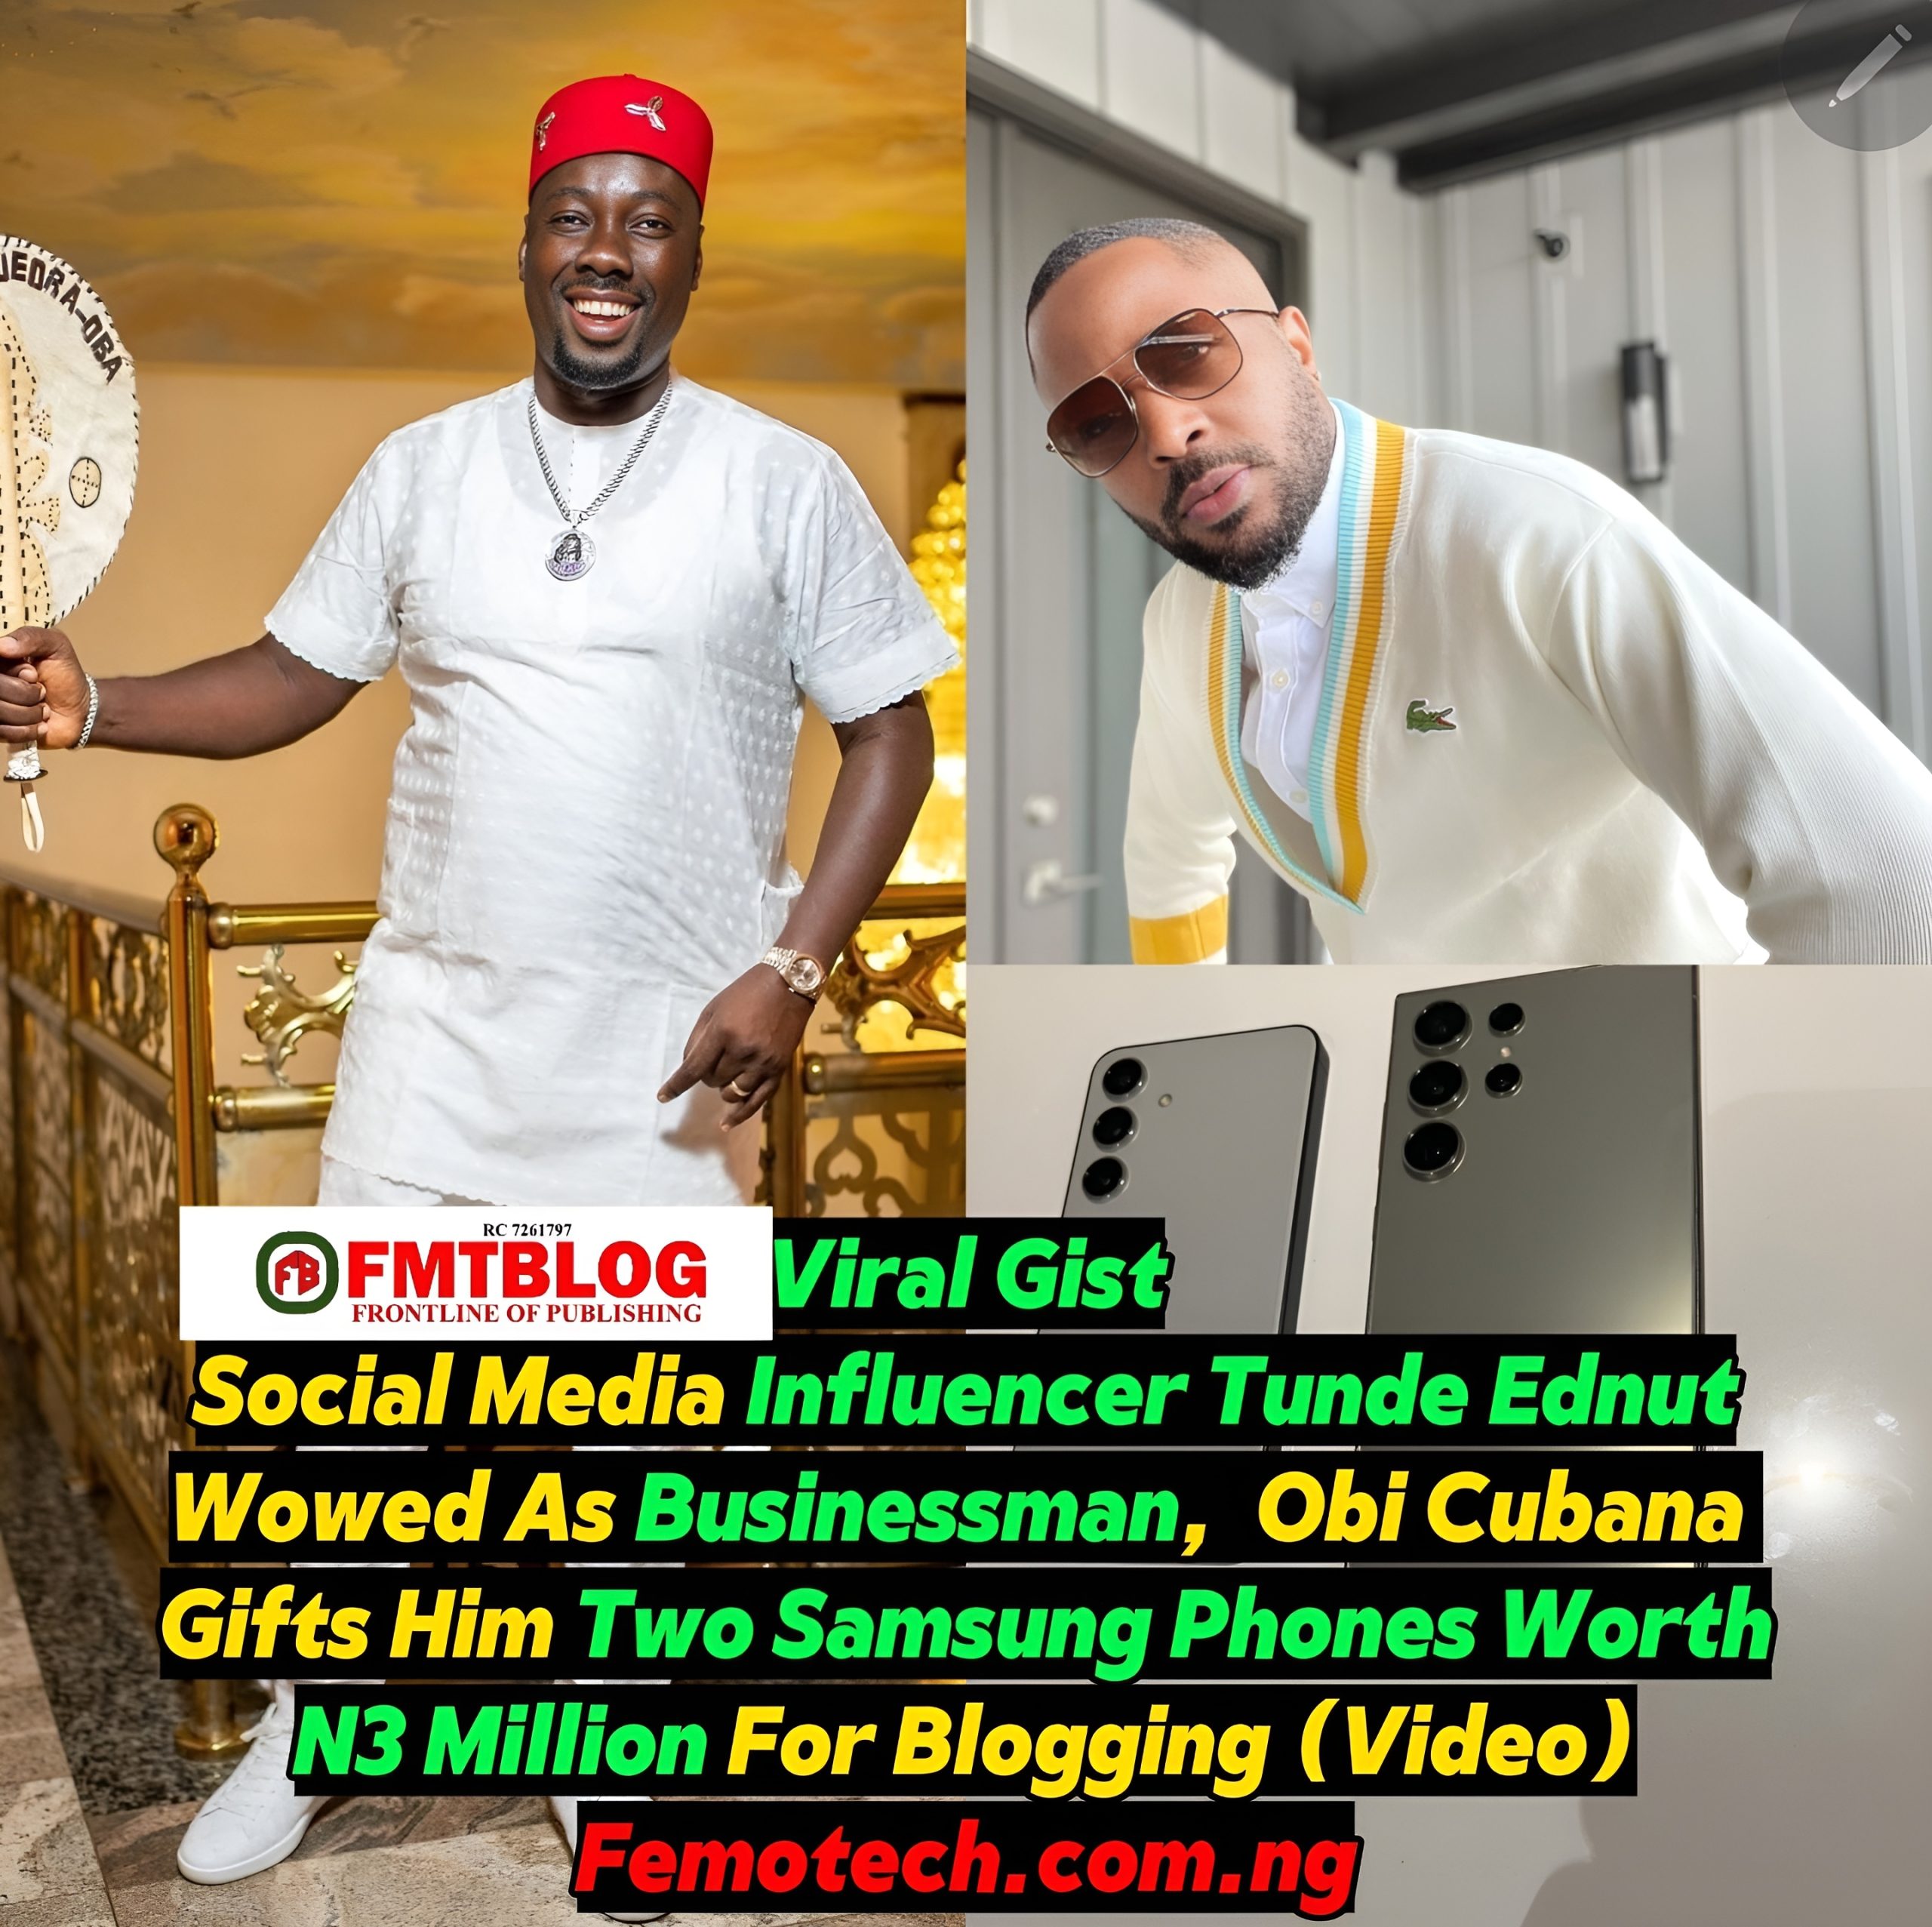 Social Media Influencer,  Tunde Ednut Wowed As Businessman, Obi Cubana Gifts Him Two Samsung Phones Worth N3 Million For Blogging(Video)